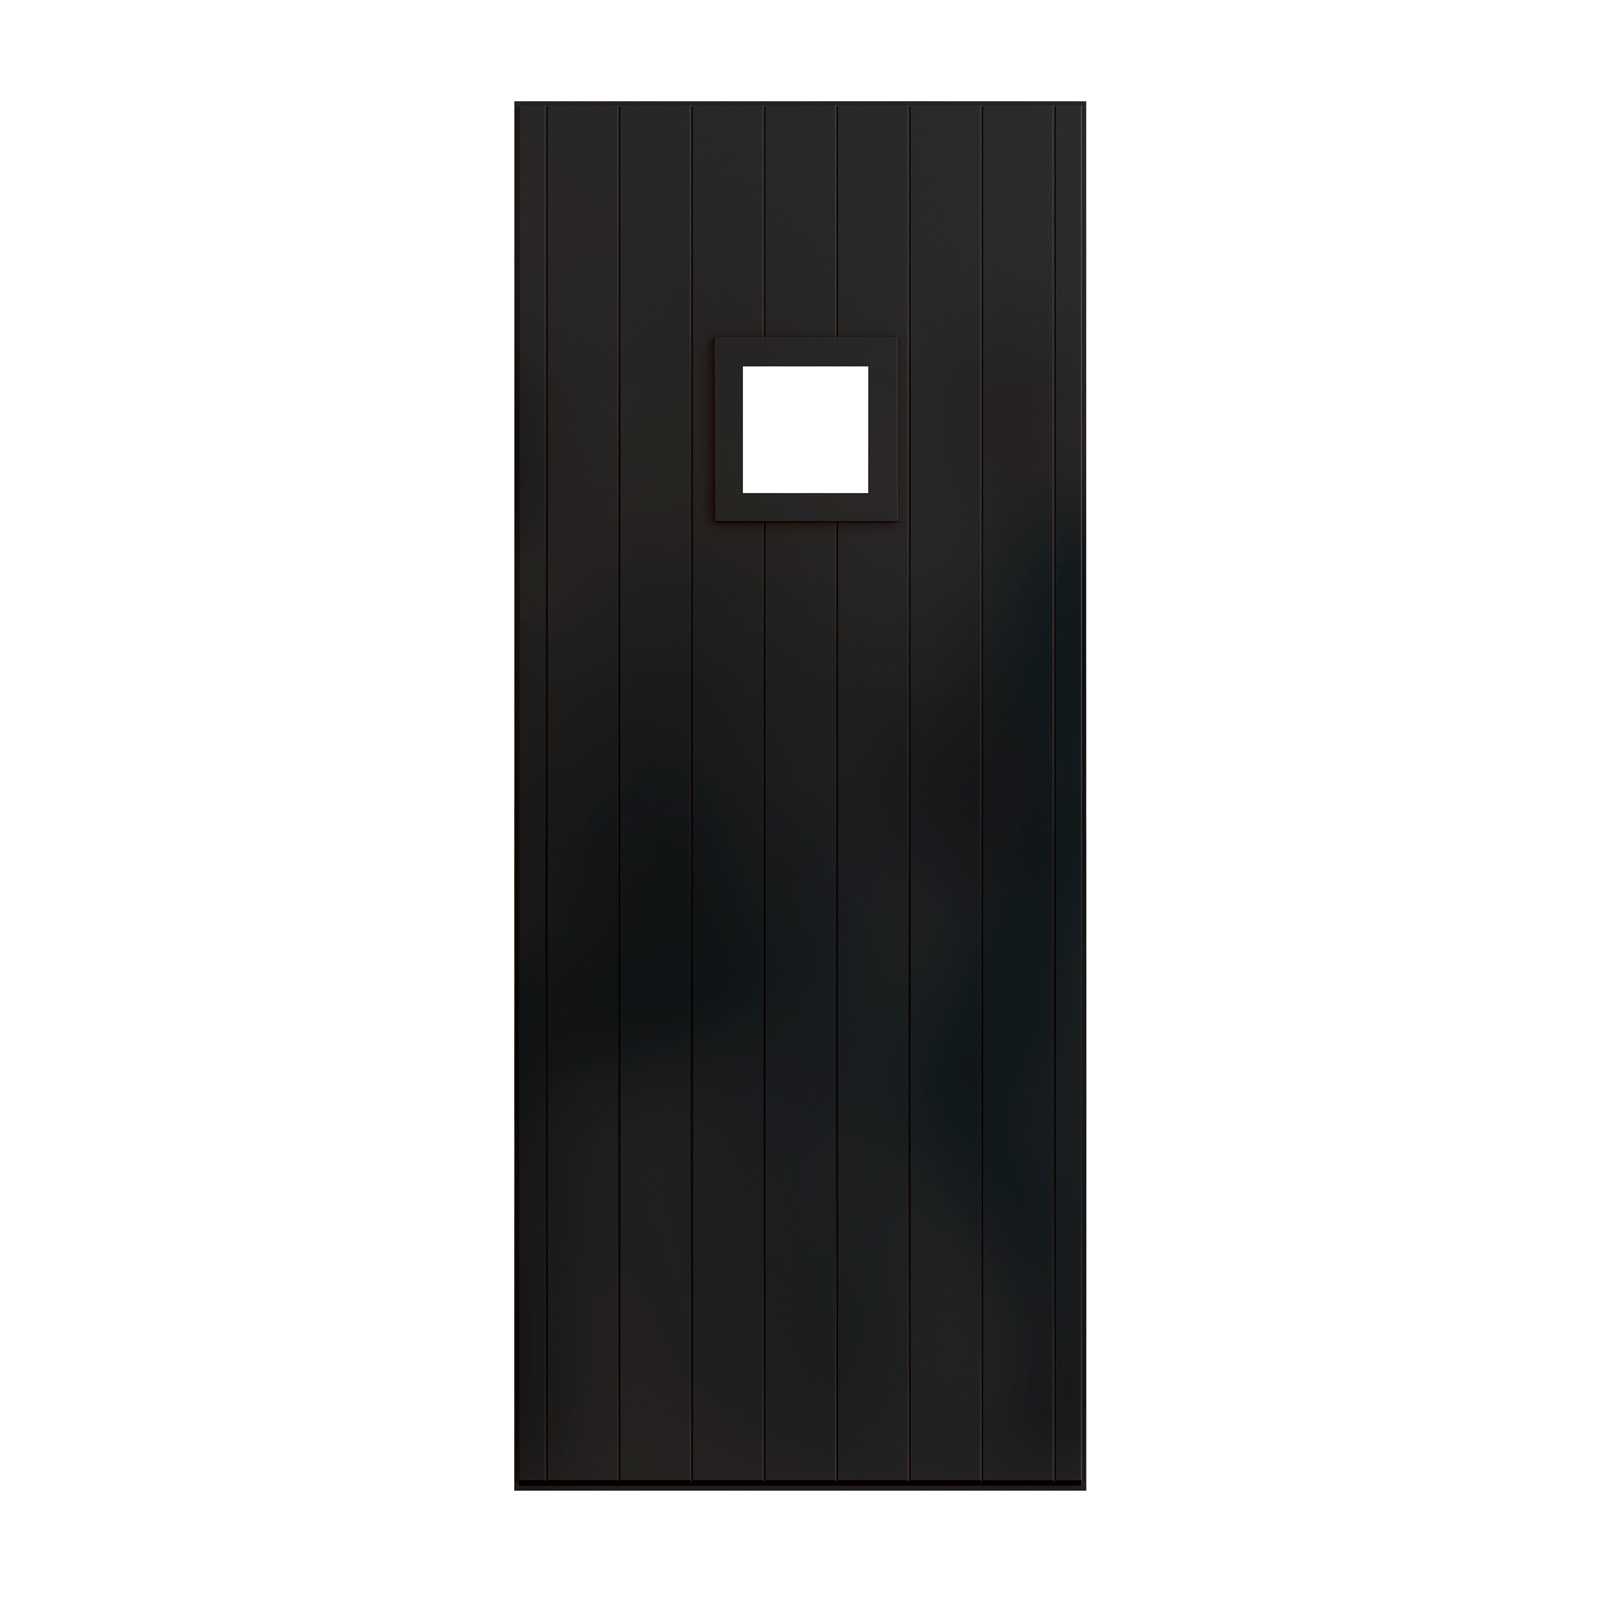 Alitherm 400 Door with PT0003P panel